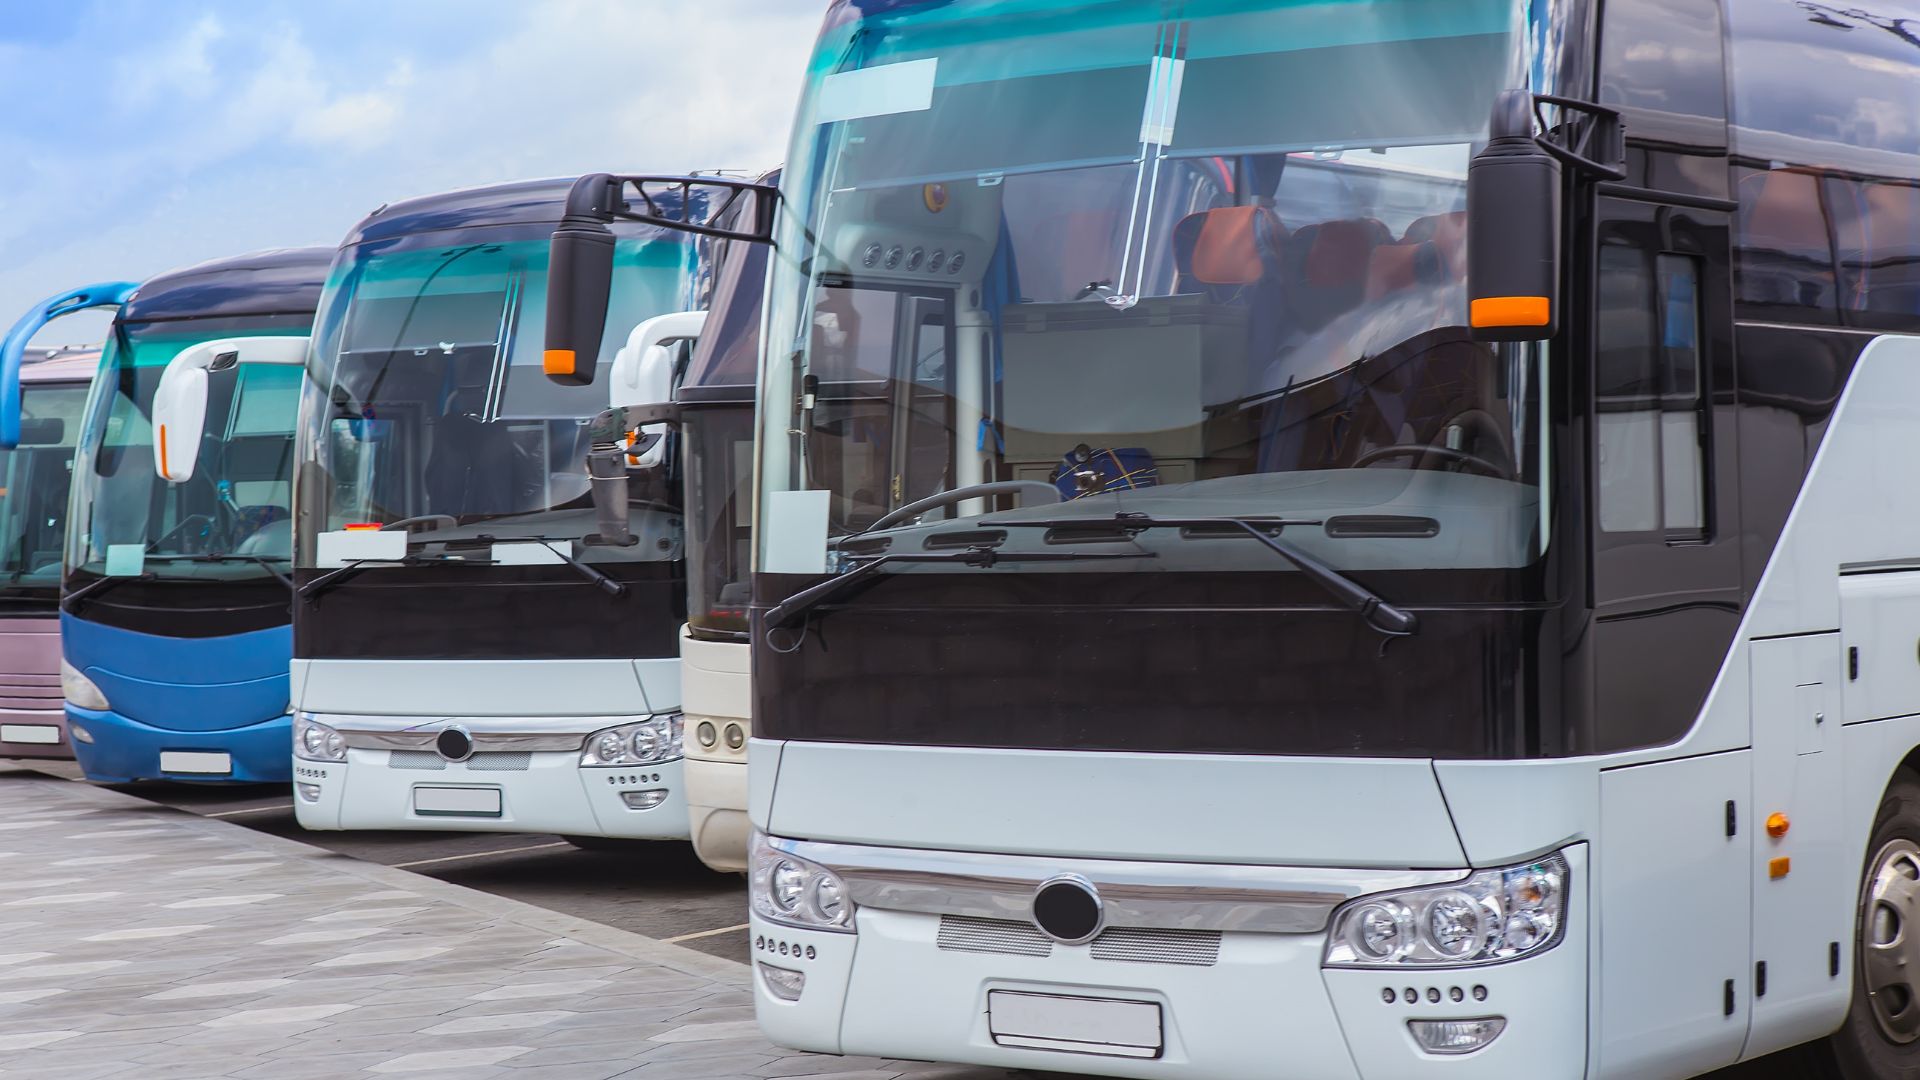 A row of motorcoaches are parked in a line